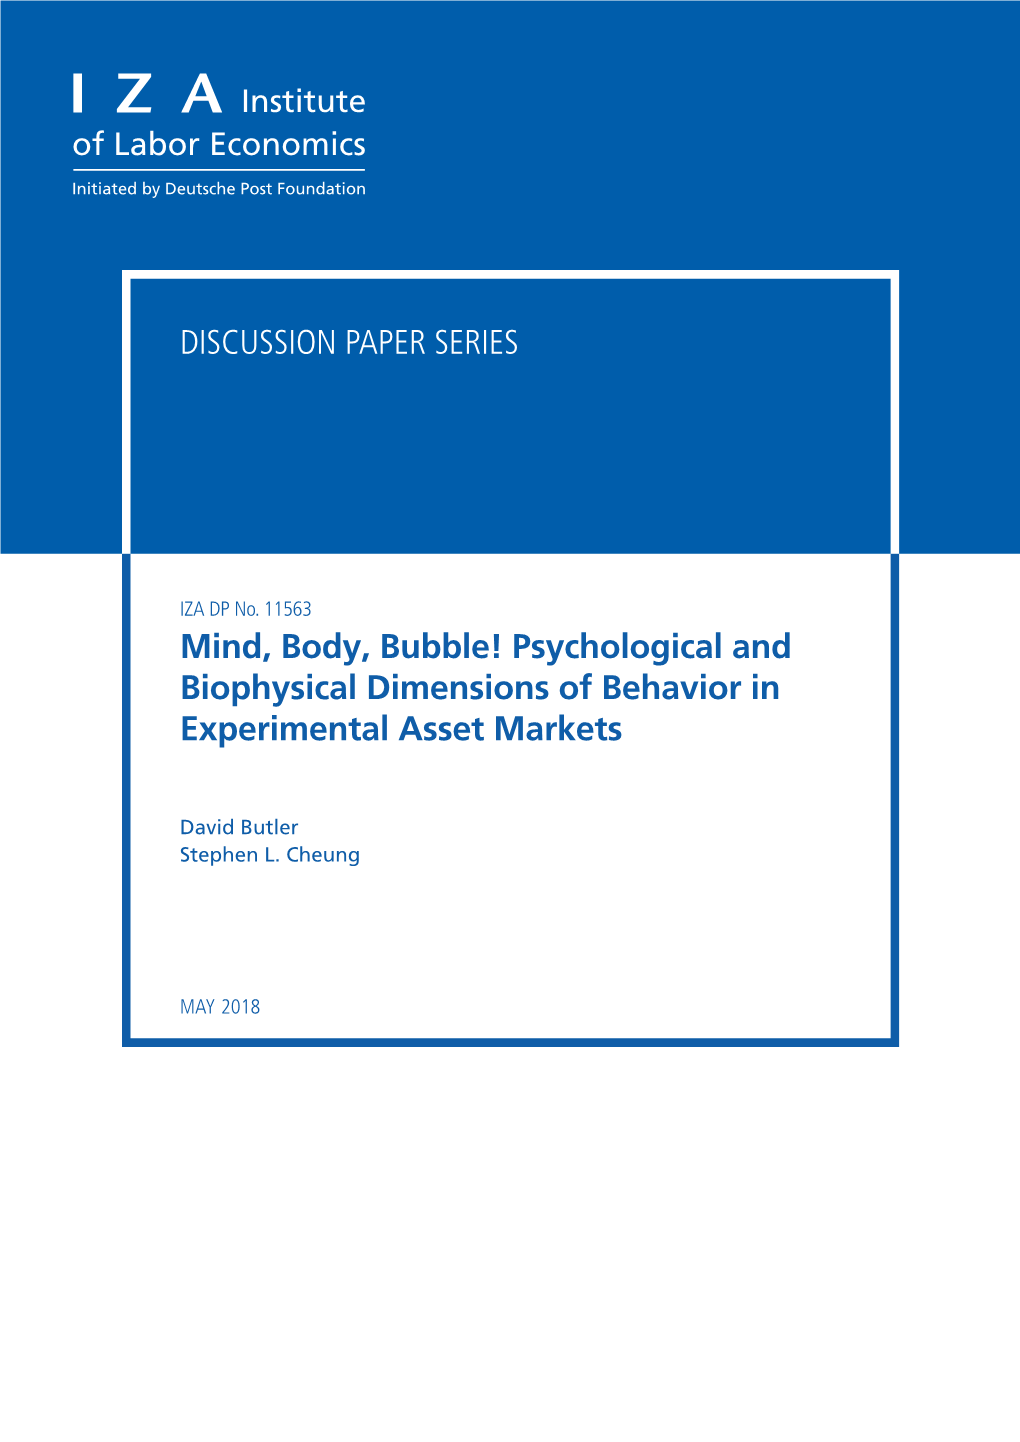 Mind, Body, Bubble! Psychological and Biophysical Dimensions of Behavior in Experimental Asset Markets